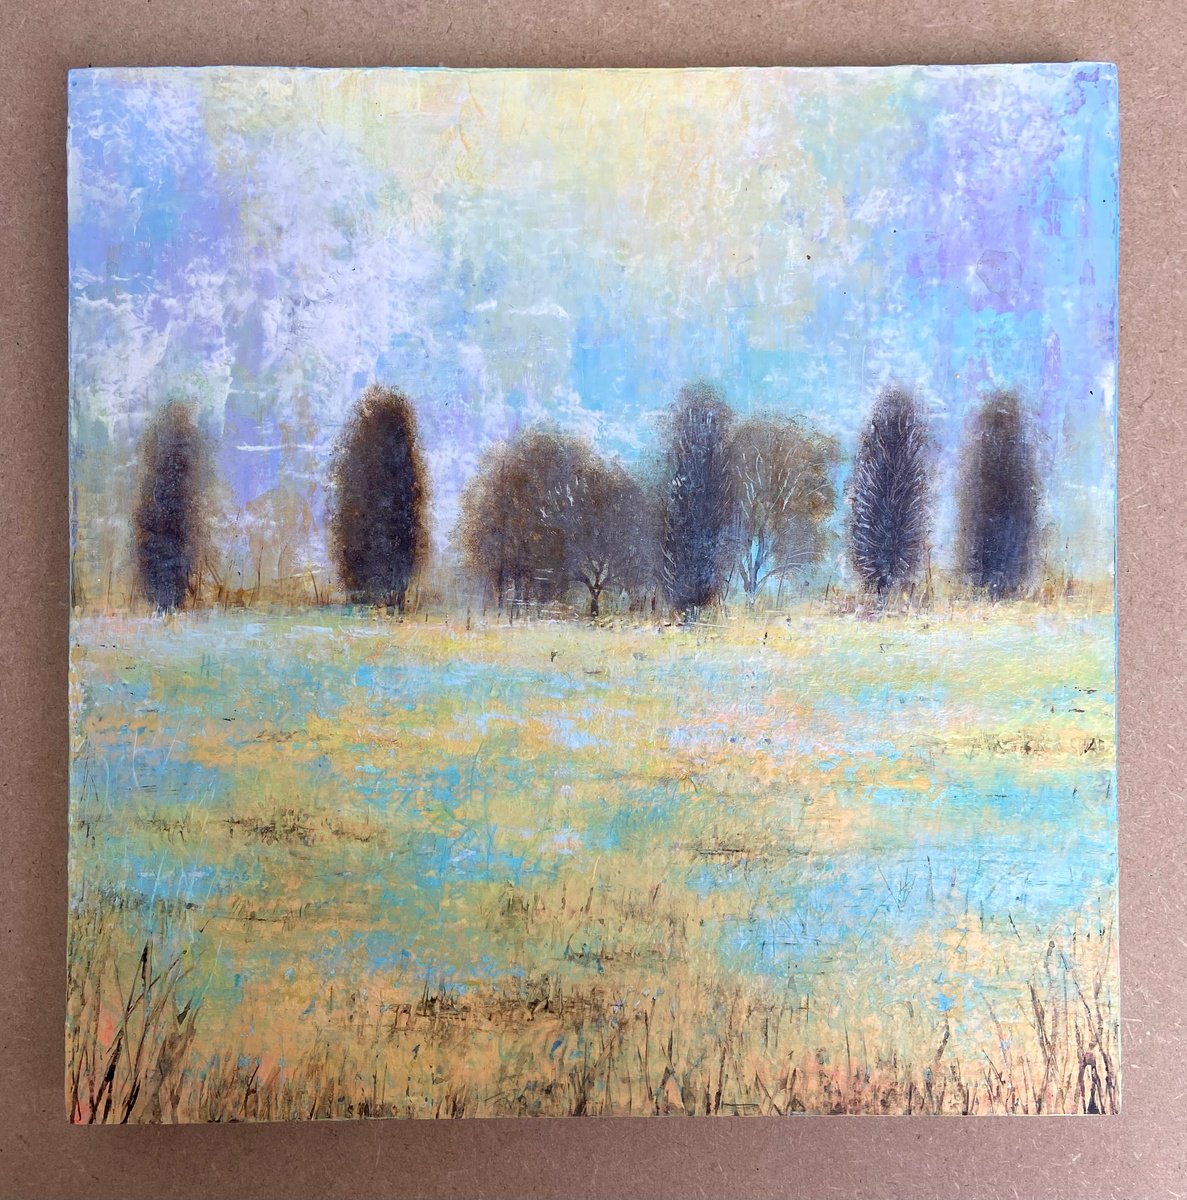 Painting 1 of Mini Landscape Collection by J E Banks